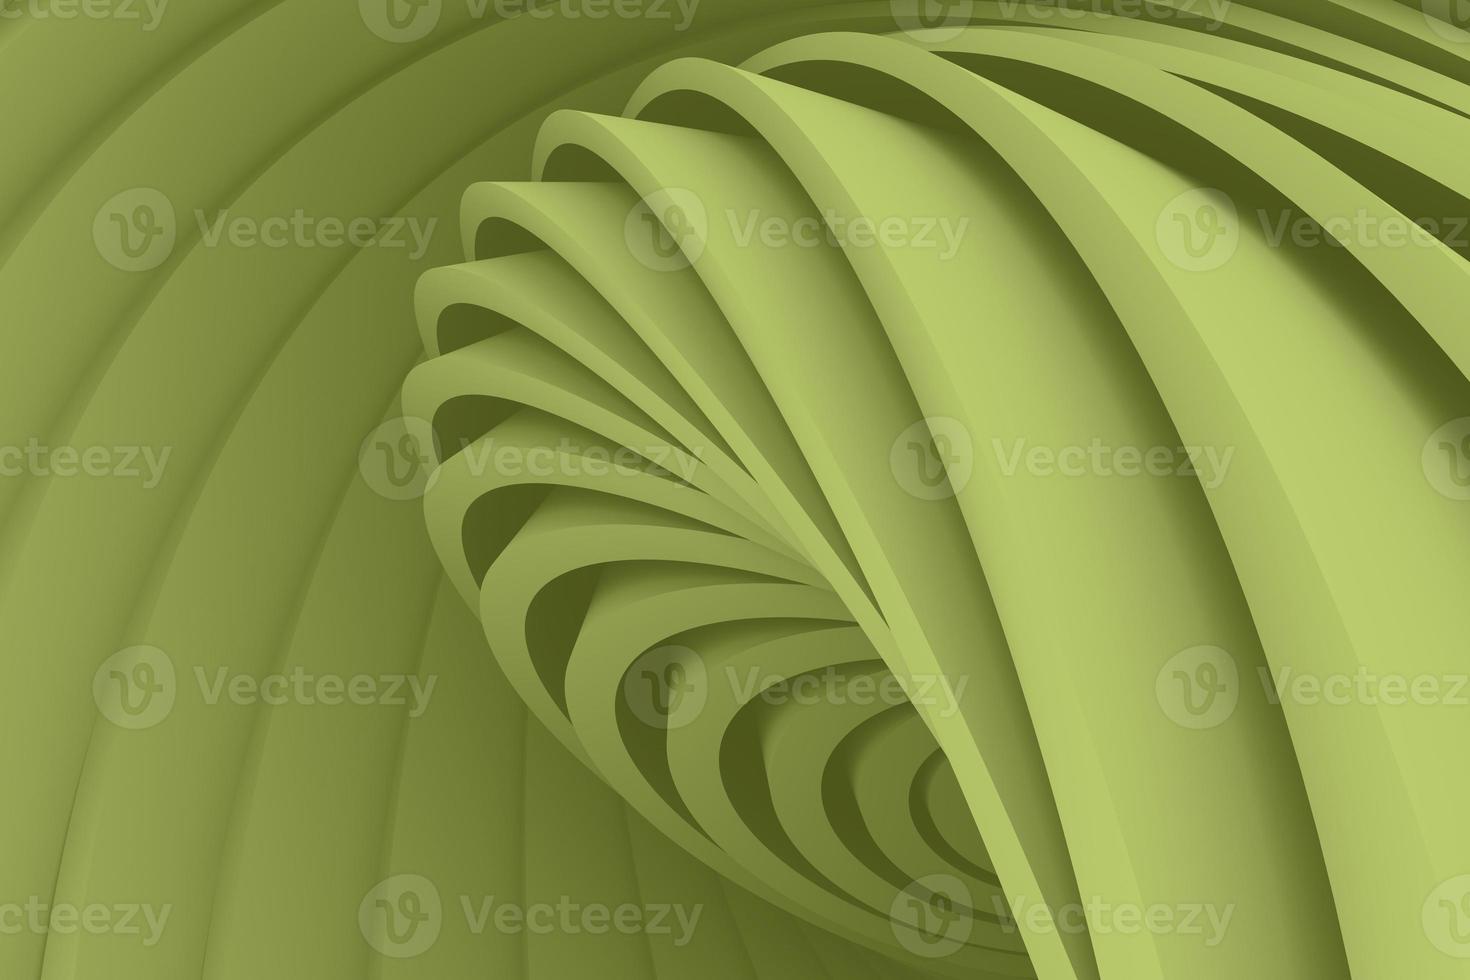 Light green dynamic twisted shape 3d rendering background photo